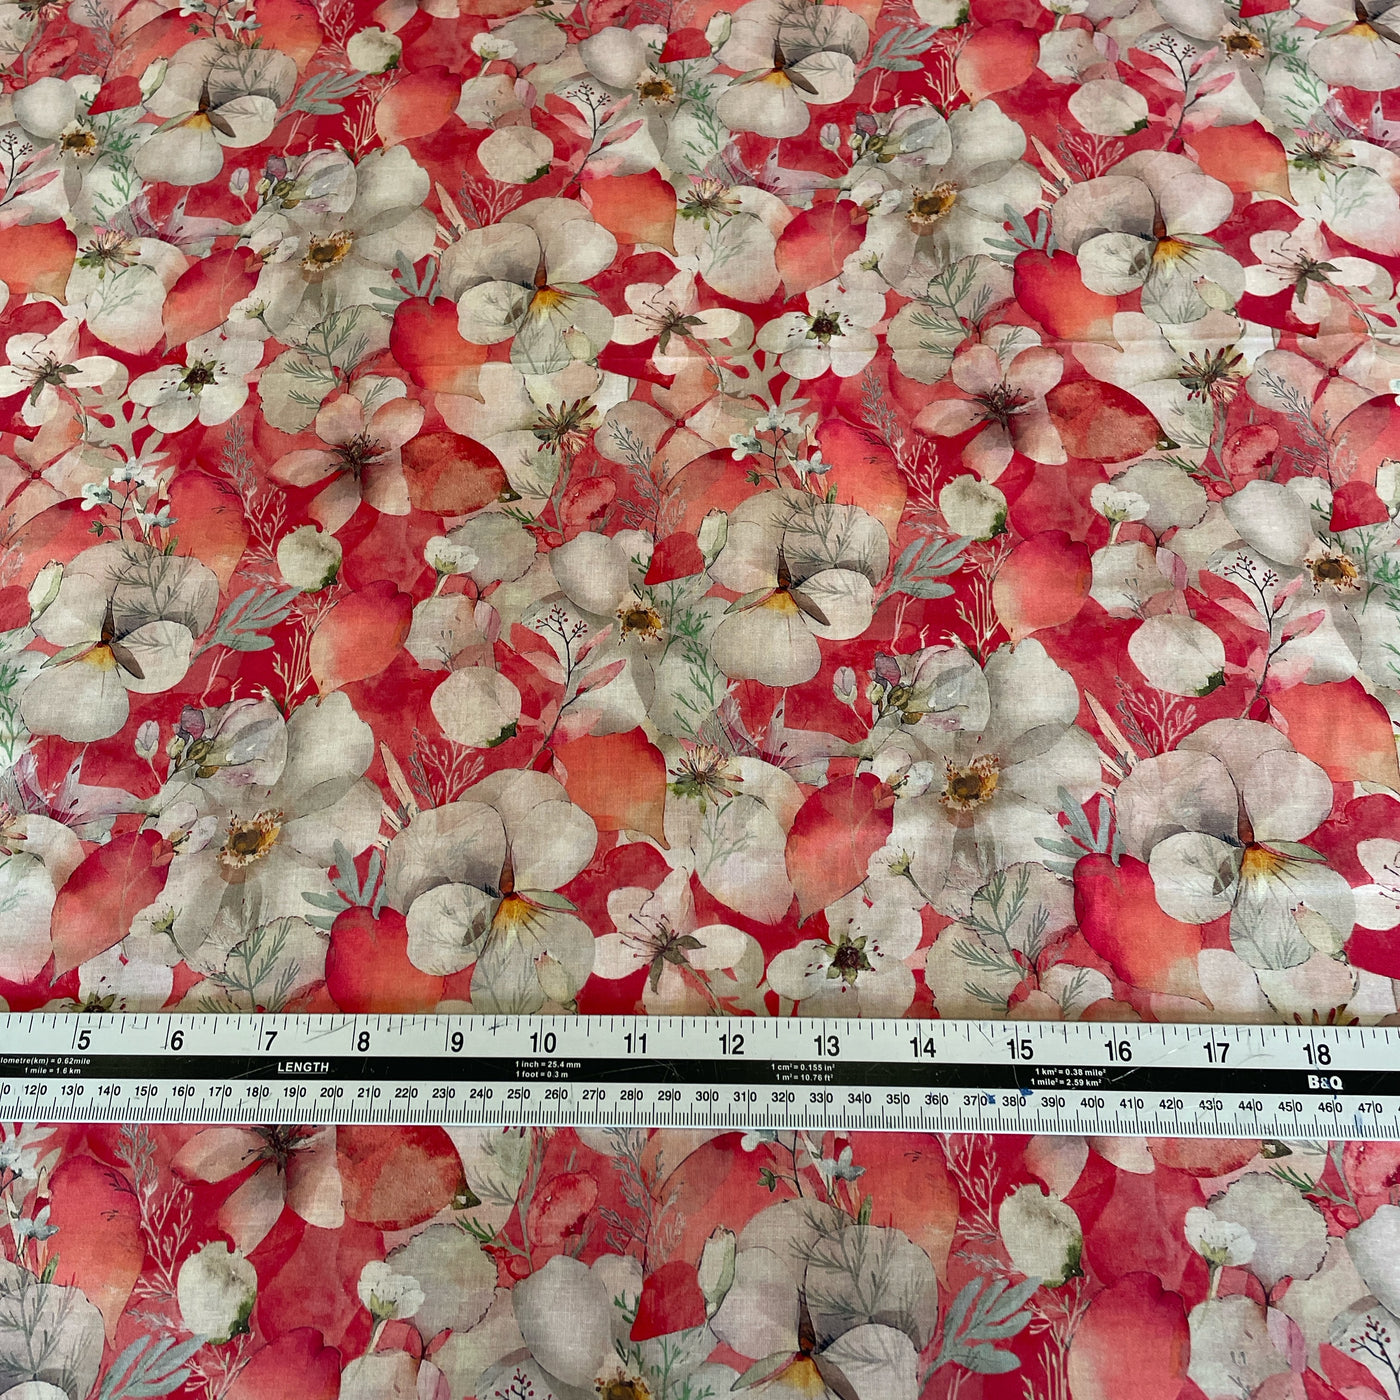 Luxurious red Digital Cotton Lawn floral prints are lightweight and soft with beautiful drape – perfect for dresses, blouses, skirts and crafts. At a width of 135cm / 53" and a weight of 75gsm